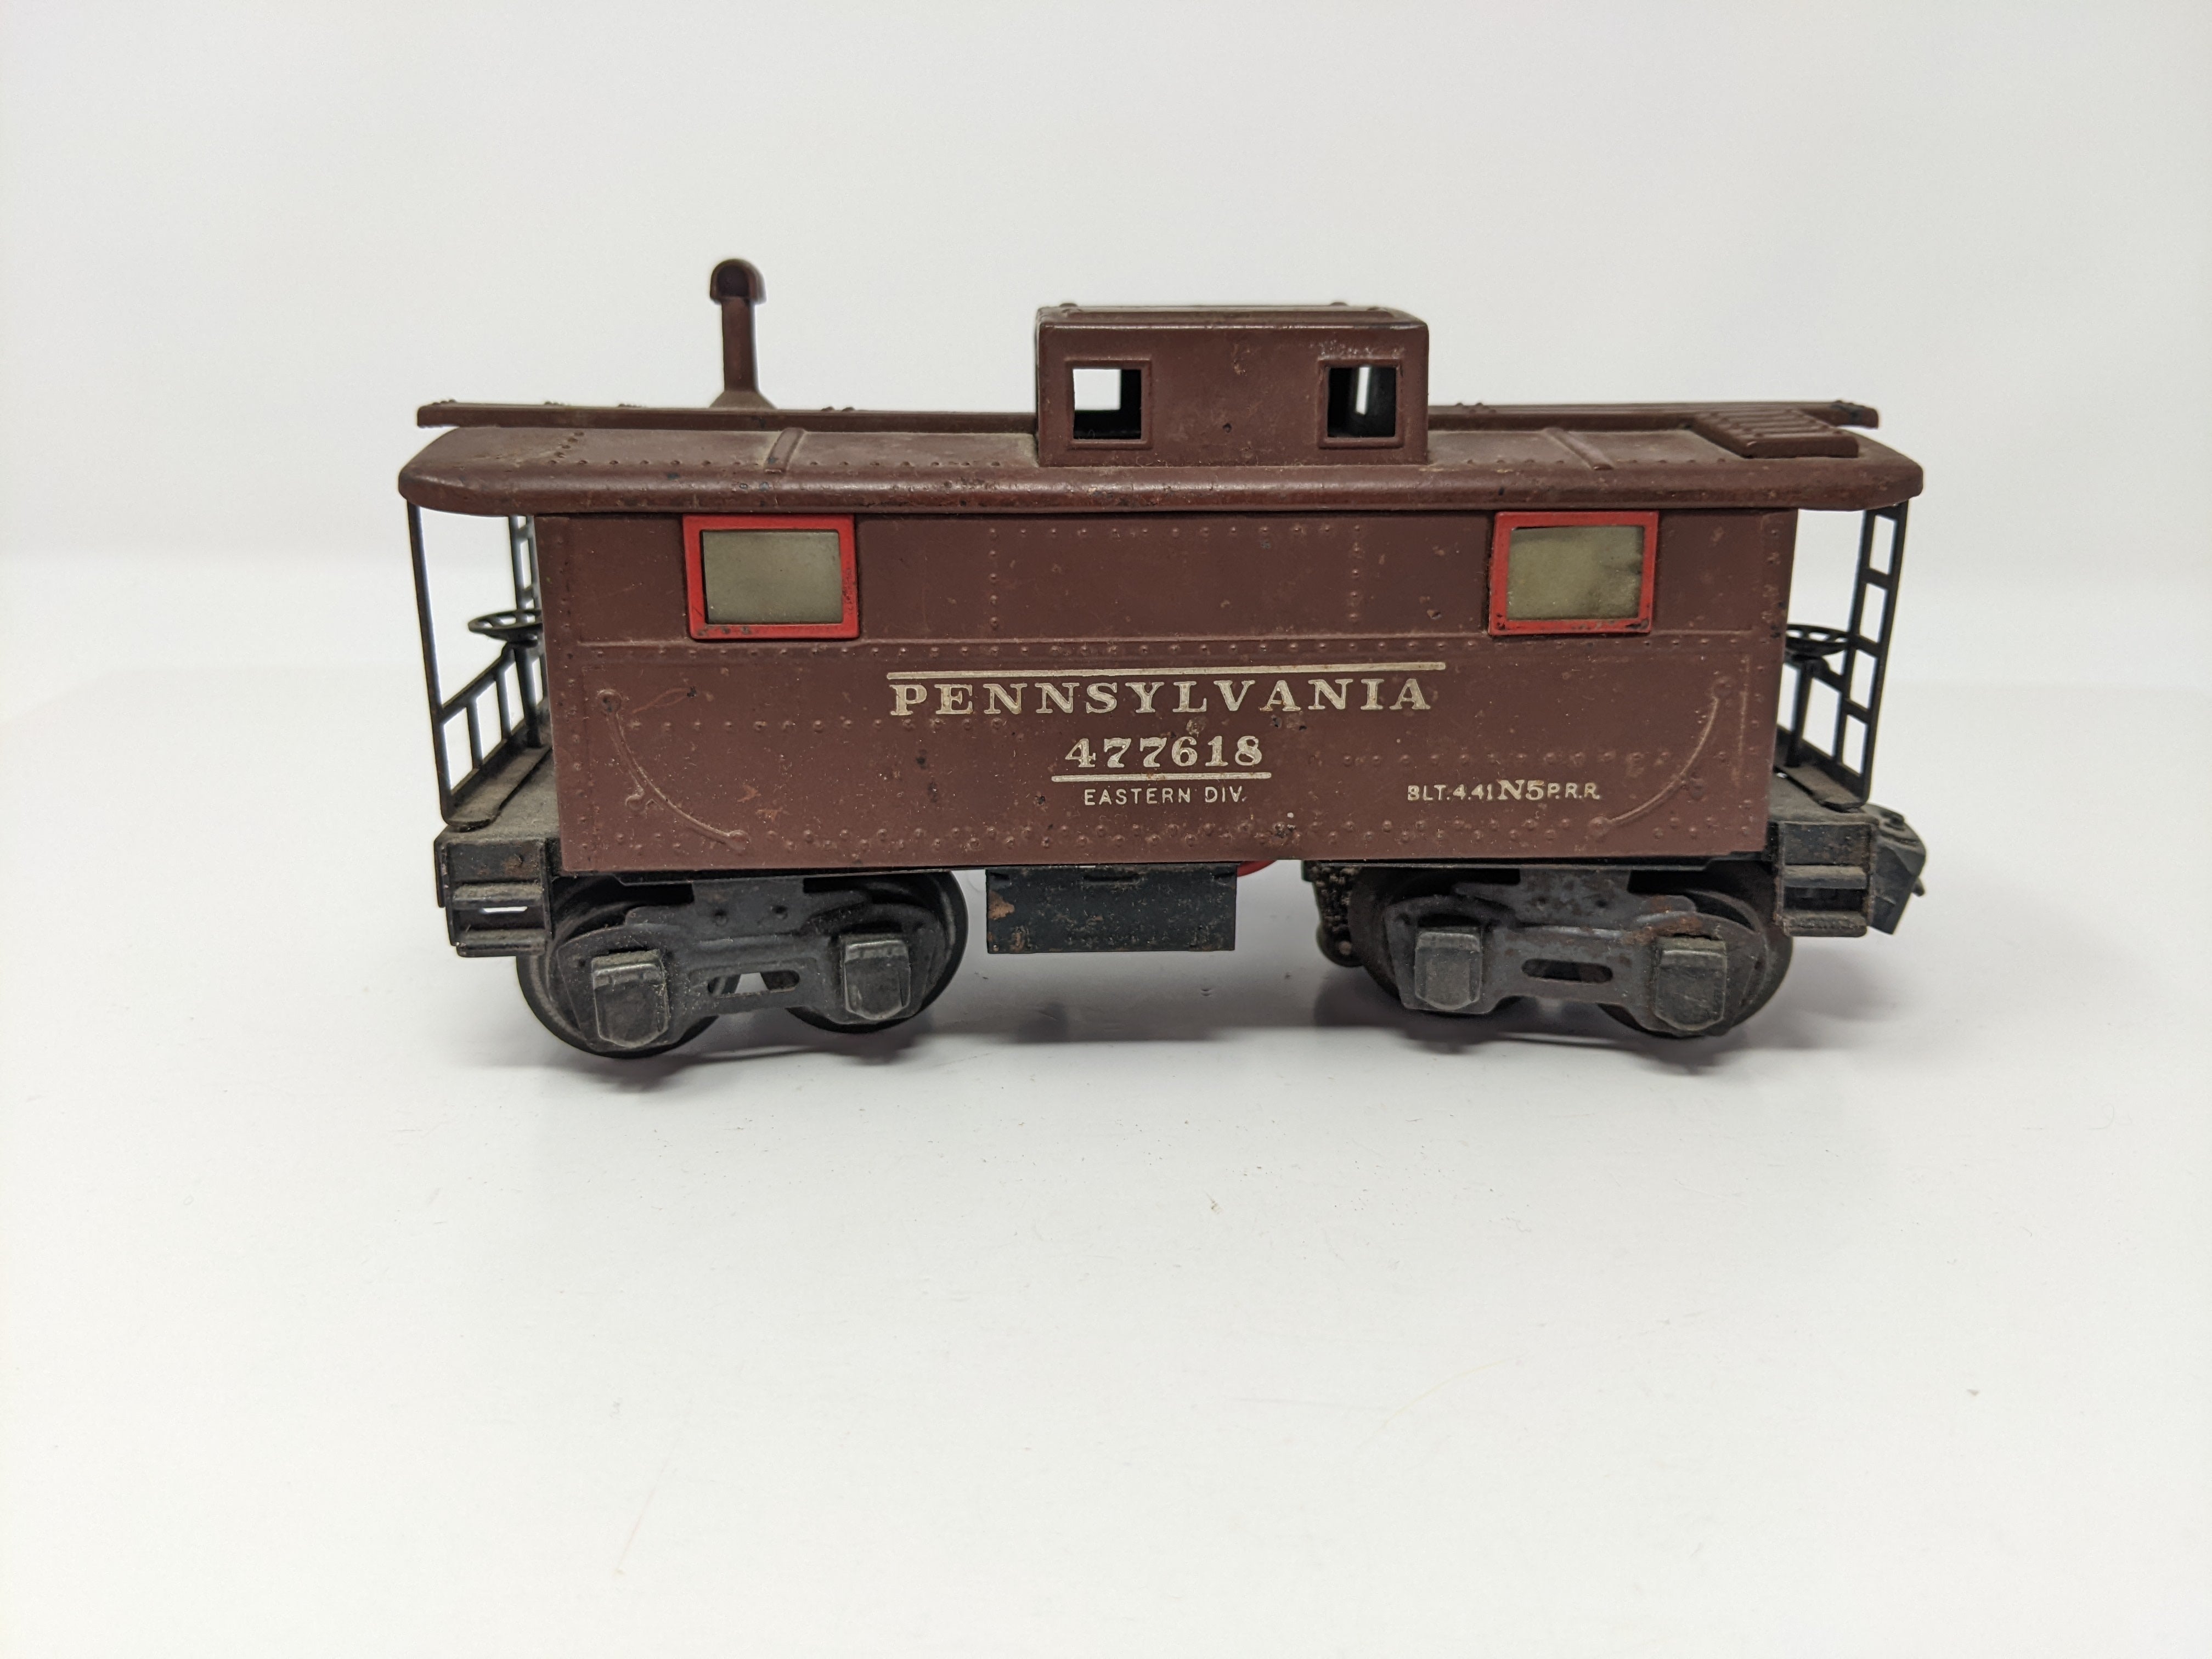 USED Lionel O, Caboose Pennsylvania, #477618, Eastern Division